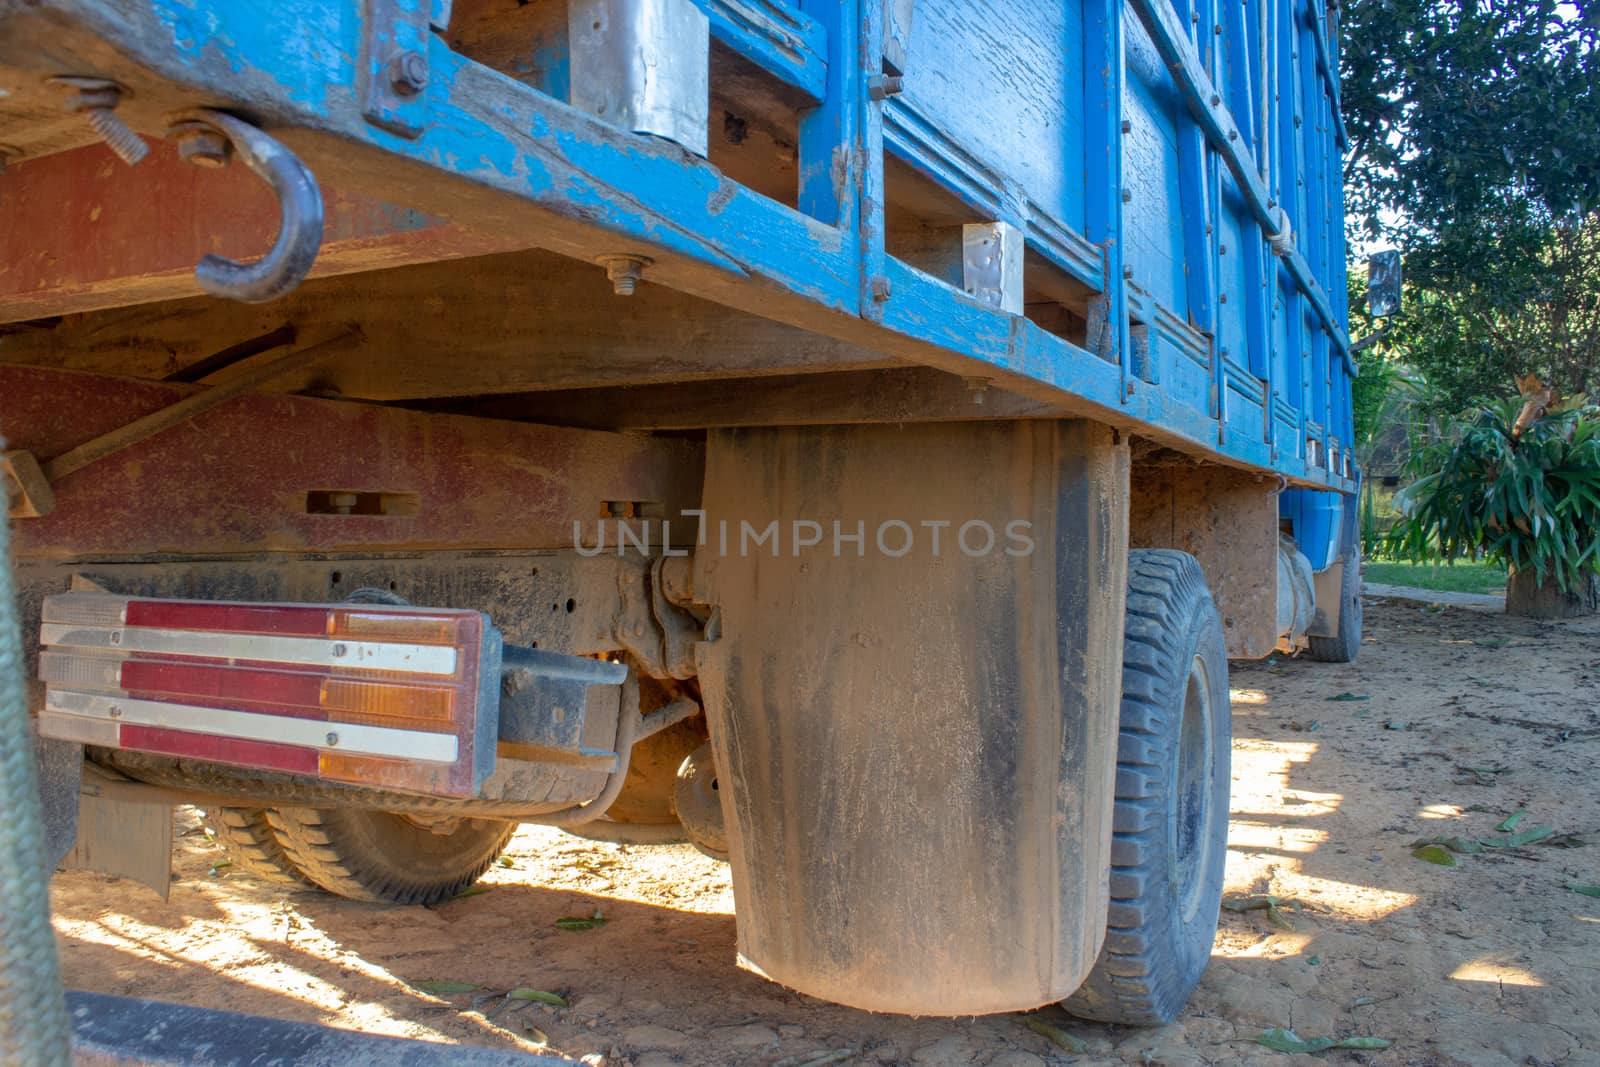 Blue truck used for transport of livestock between farms by etcho